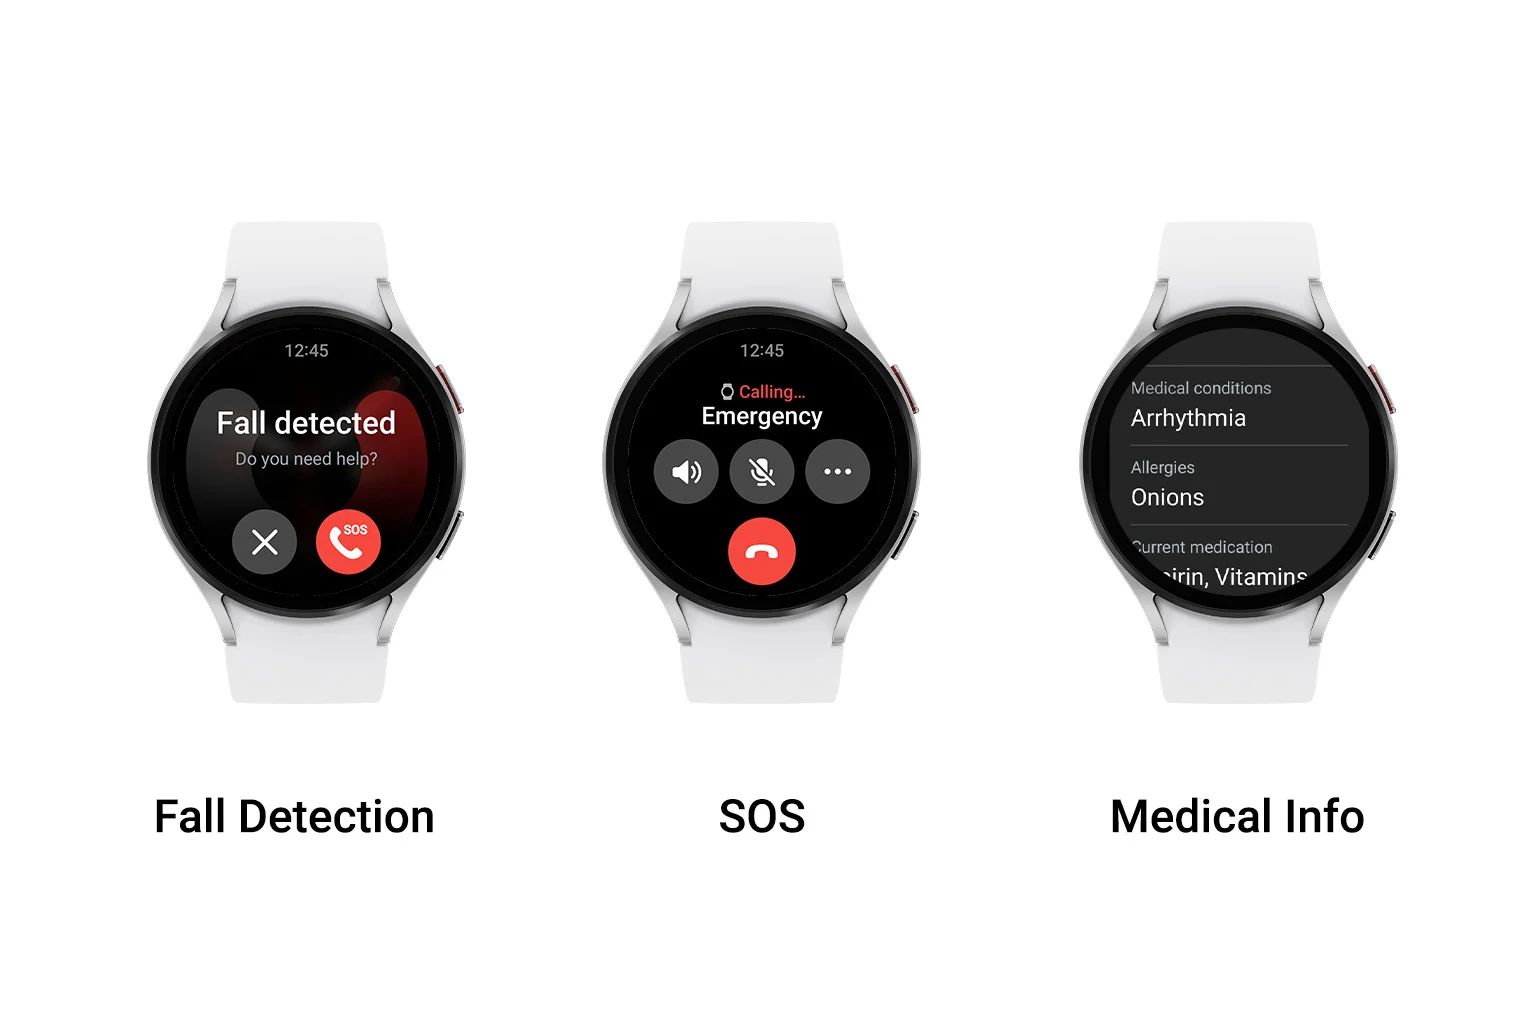 A product photo showing Samsung One UI 5 Watch's fall detection, SOS feature and medical info screens.